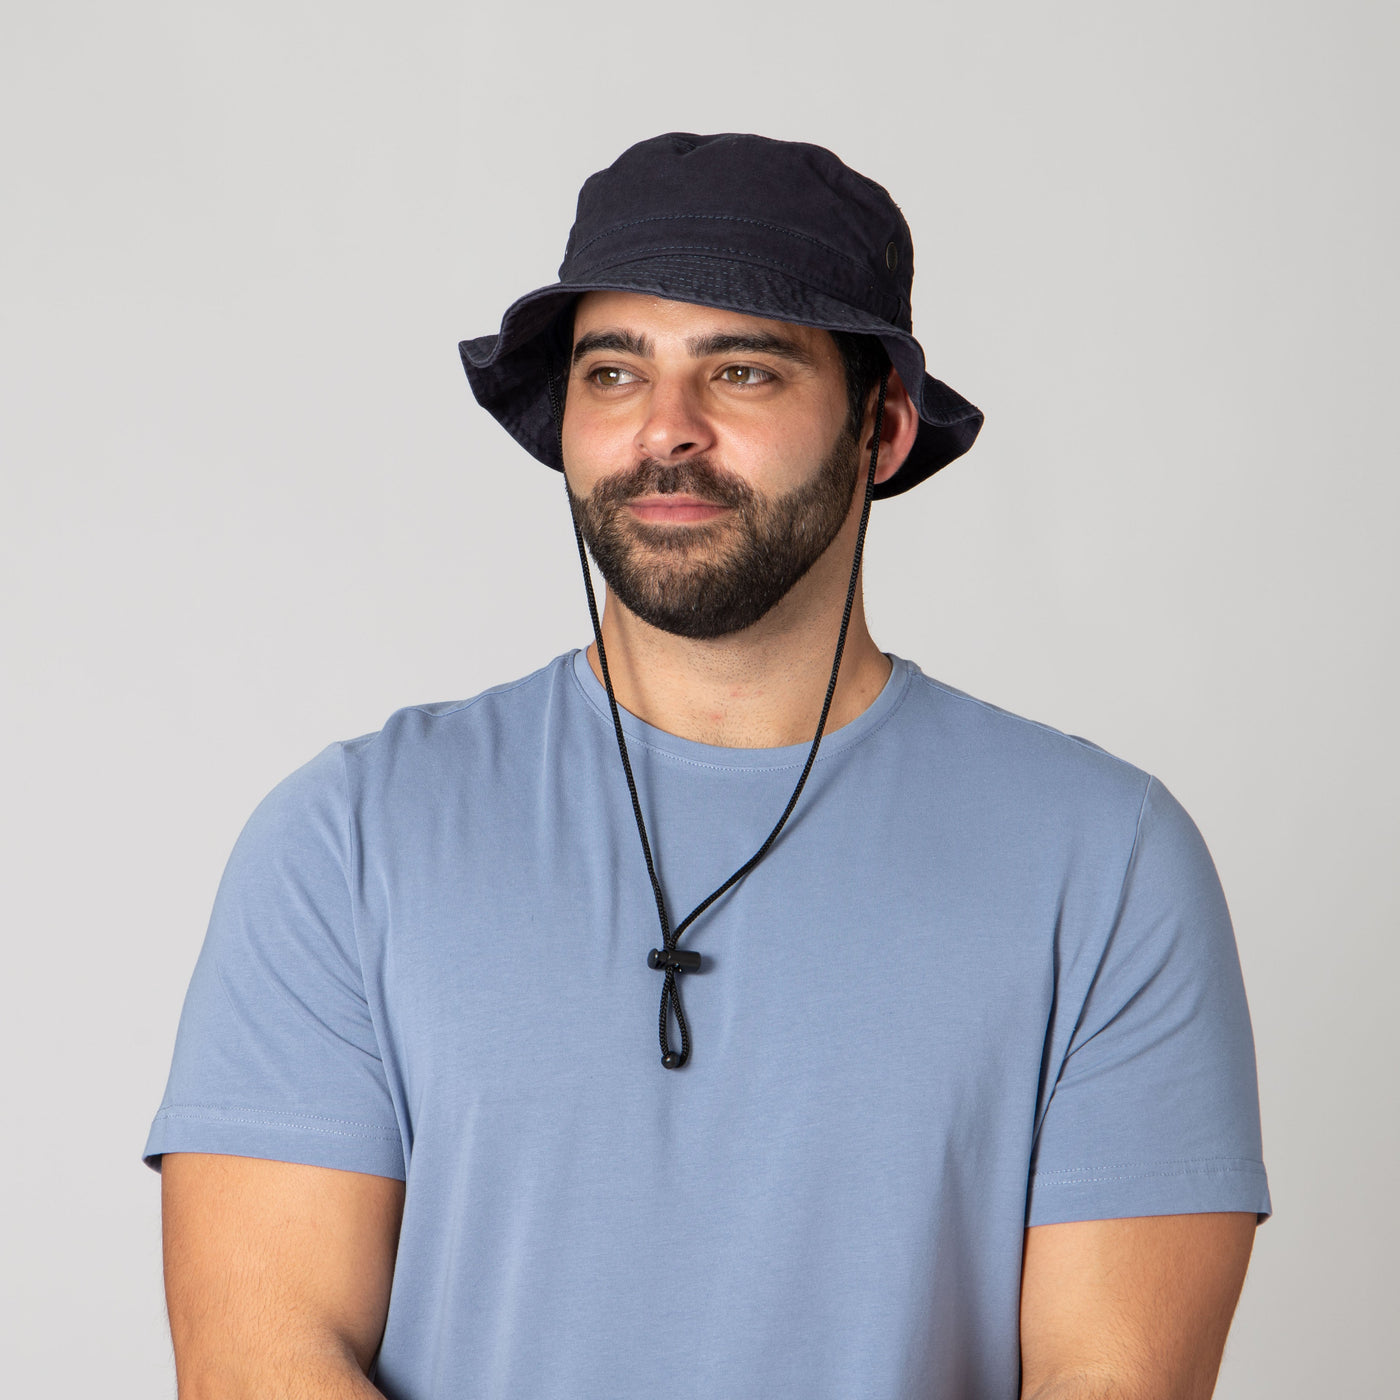 OUTDOOR - Mens Bucket Hat With Chin Cord And Wicking Sweatband